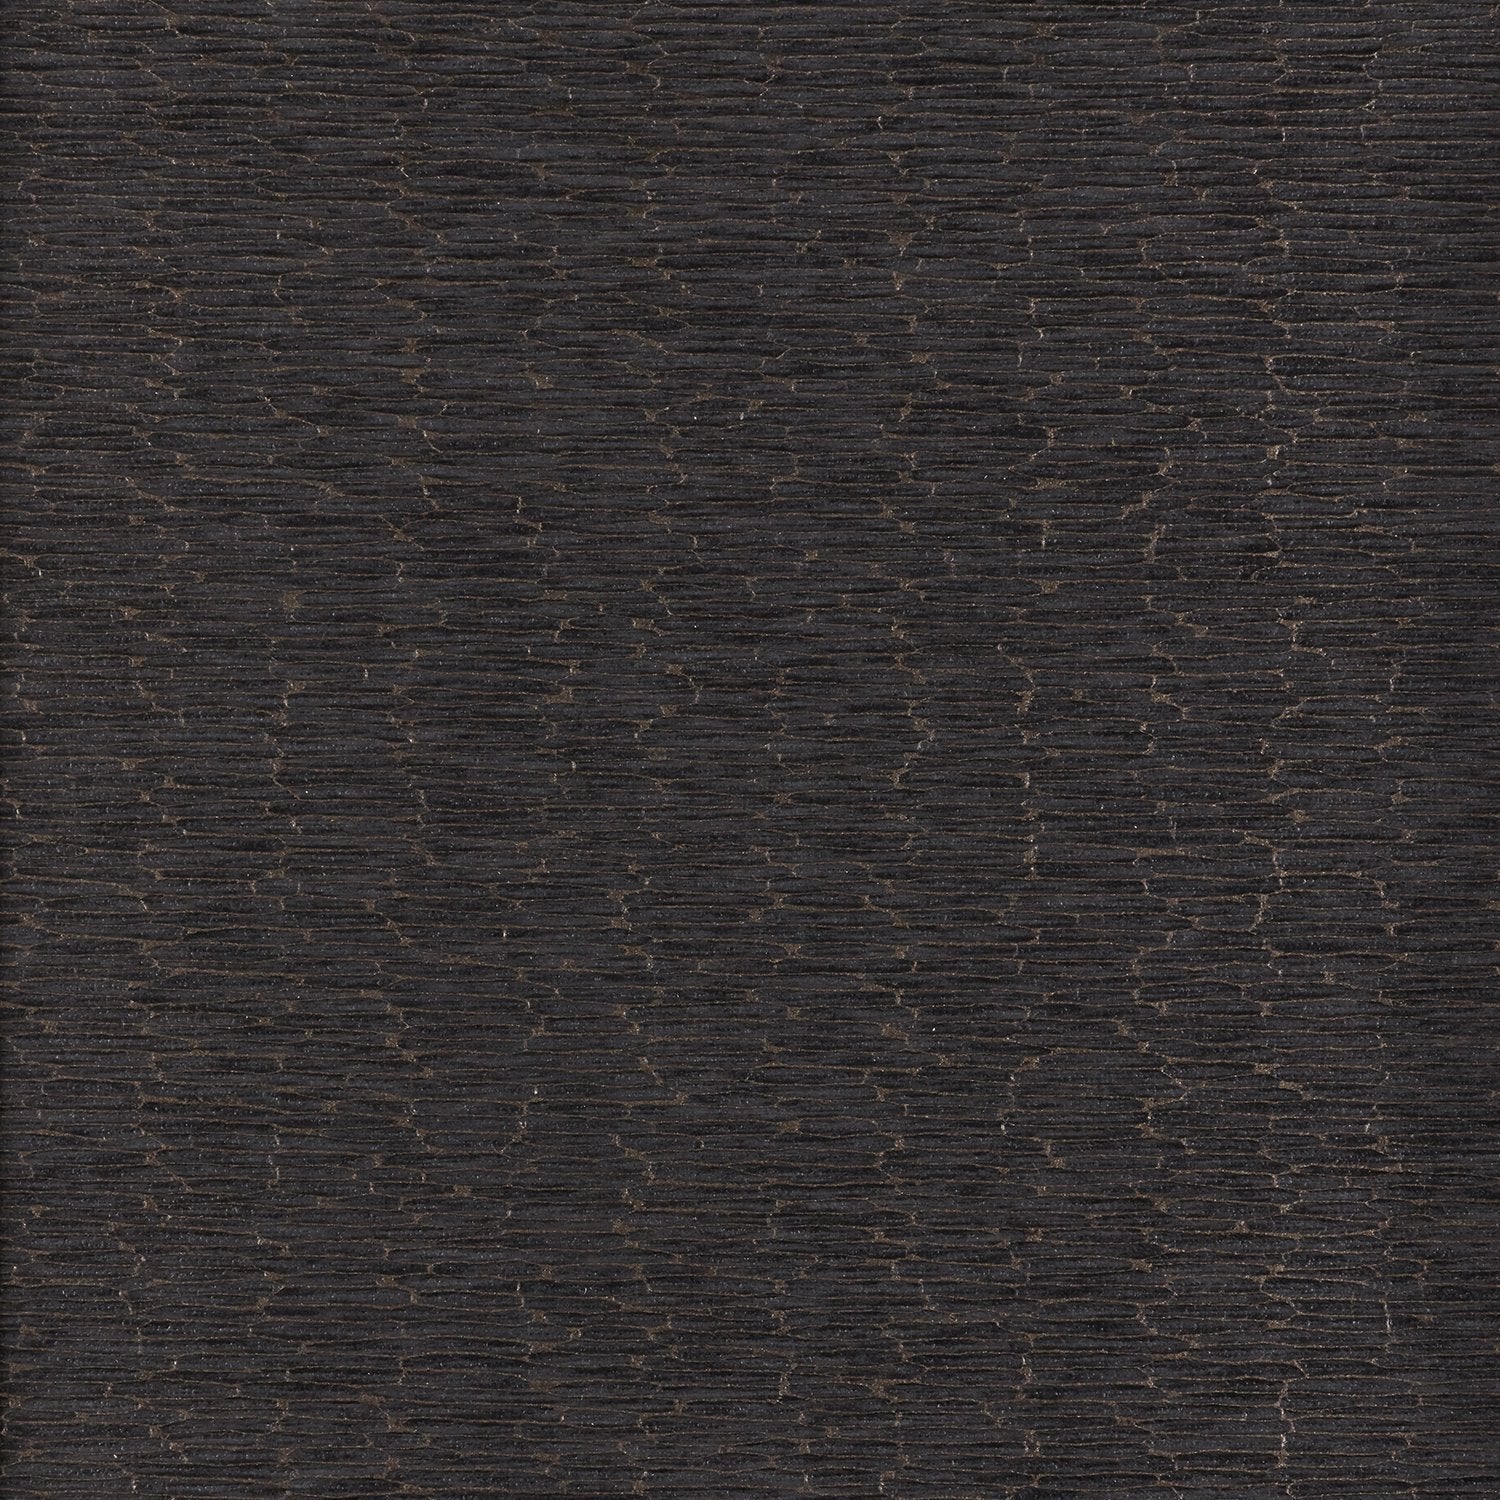 Chipper - Y46865 - Wallcovering - Vycon - Kube Contract